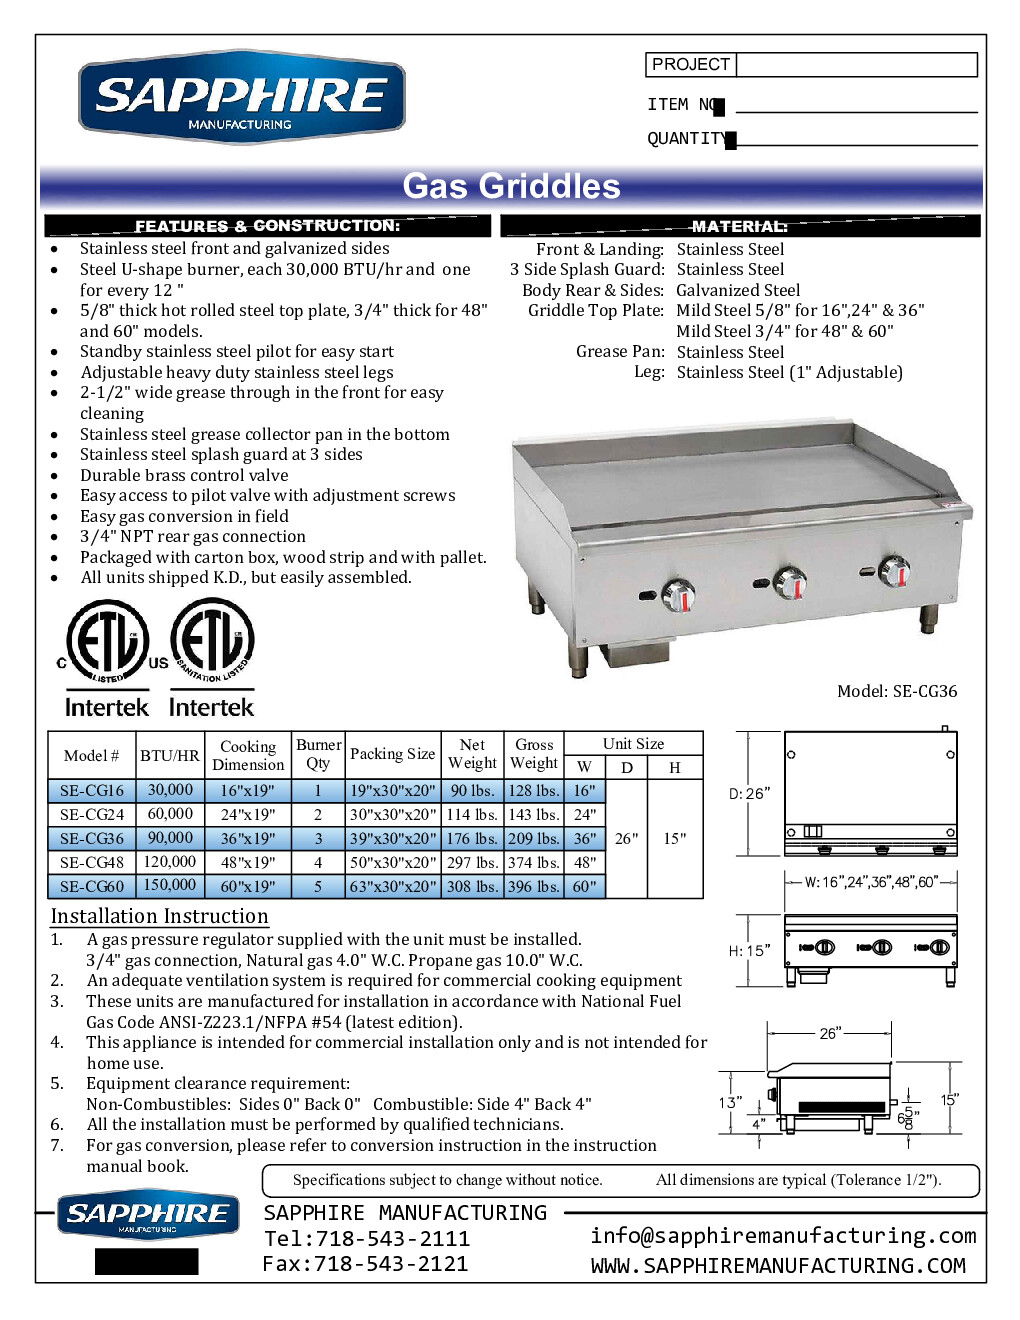 Sapphire Manufacturing SE-CG48 Countertop Gas Griddle / Hotplate